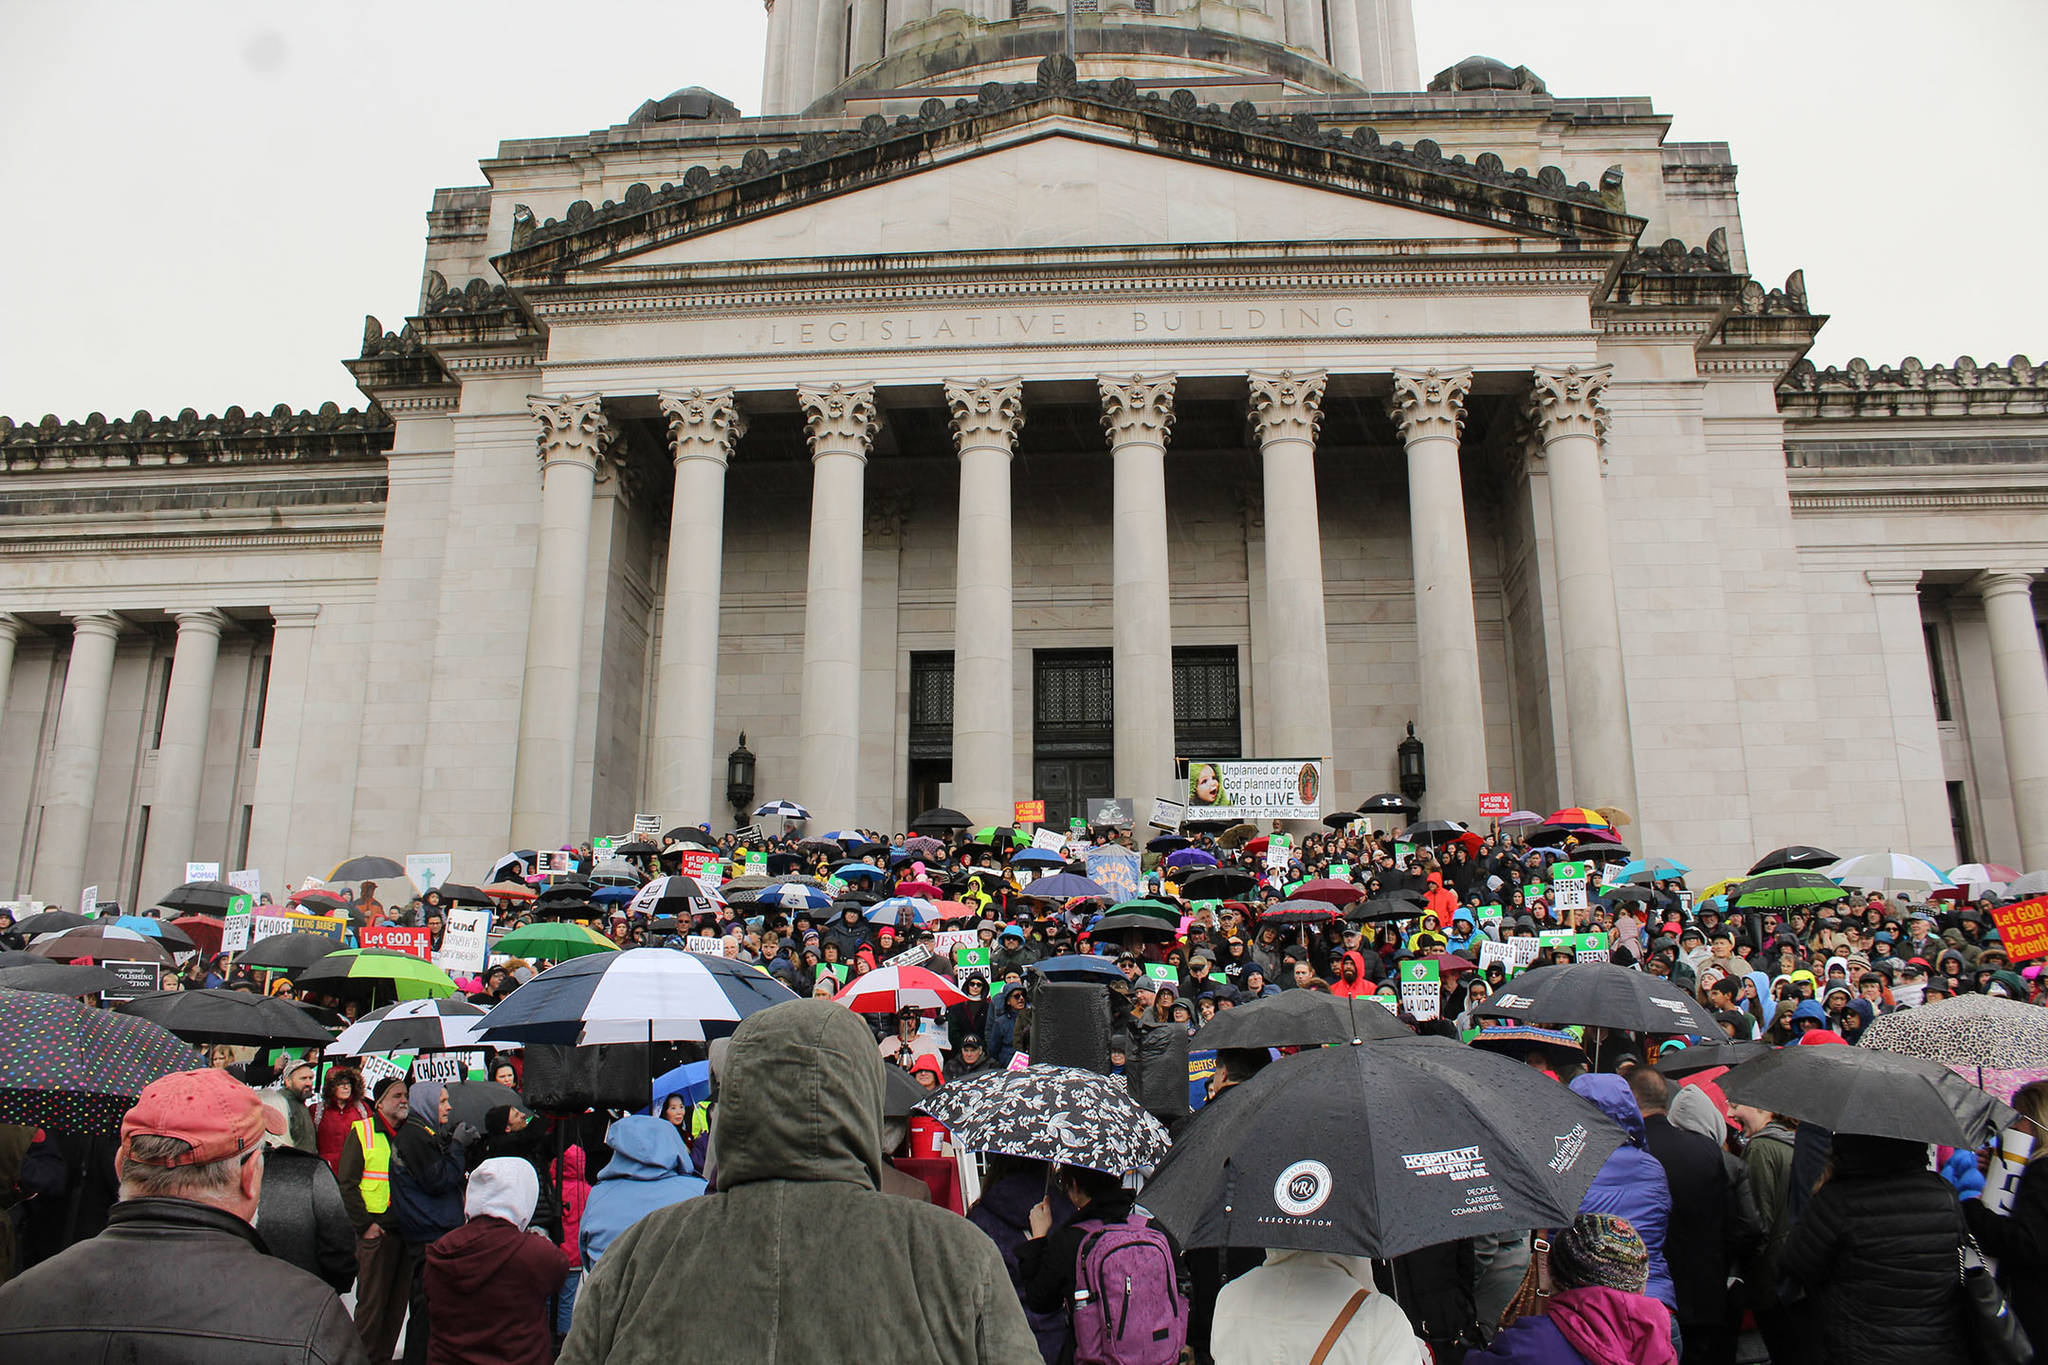 Hundreds of people turned out for the annual March for Life. Photo by Taylor McAvoy